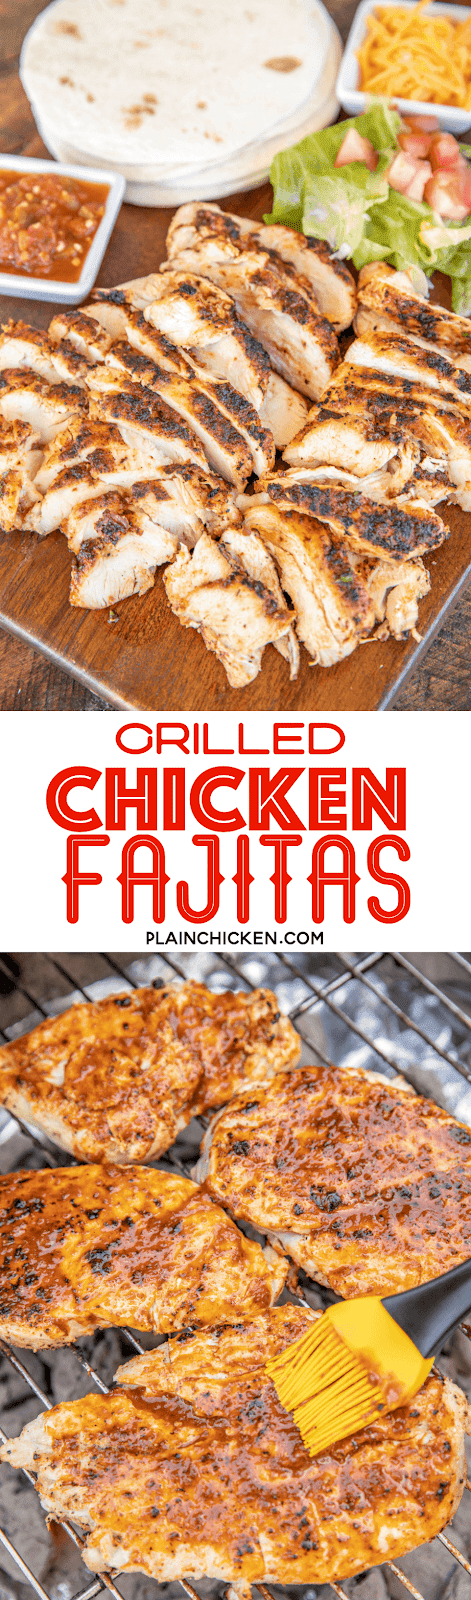 collage of grilled chicken fajitas